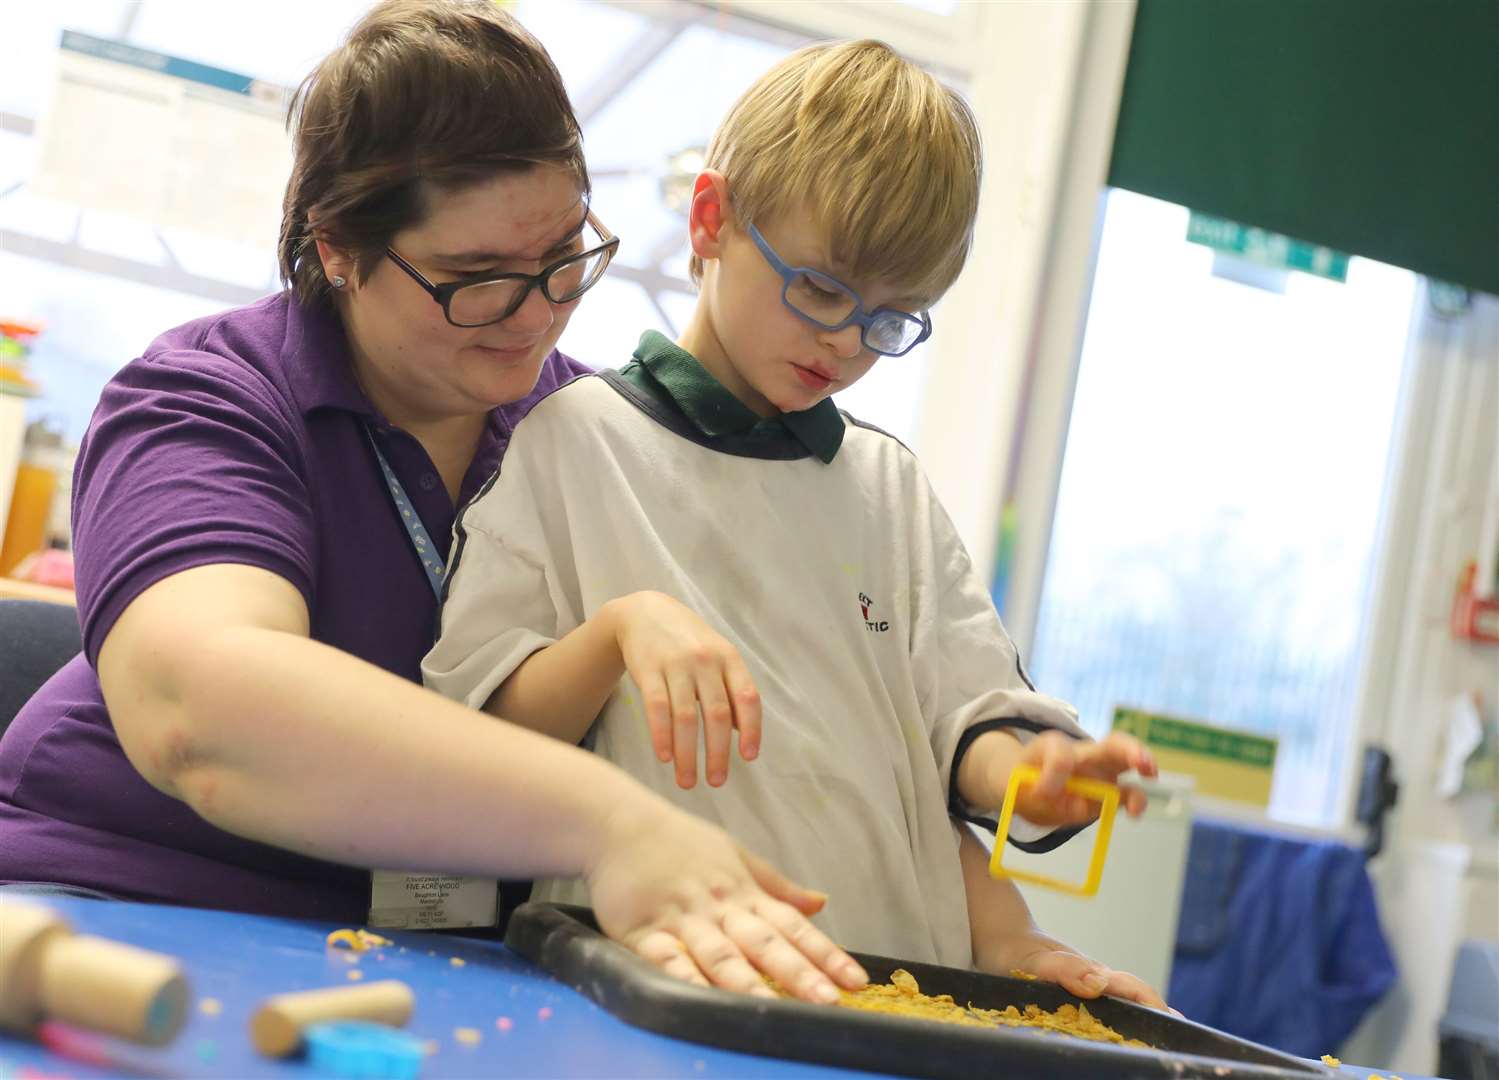 Oliver Turner and Hayley Omoregie enjoy some arts and crafts at Five Acre Wood School, Boughton Lane, Maidstone Picture: Andy Jones